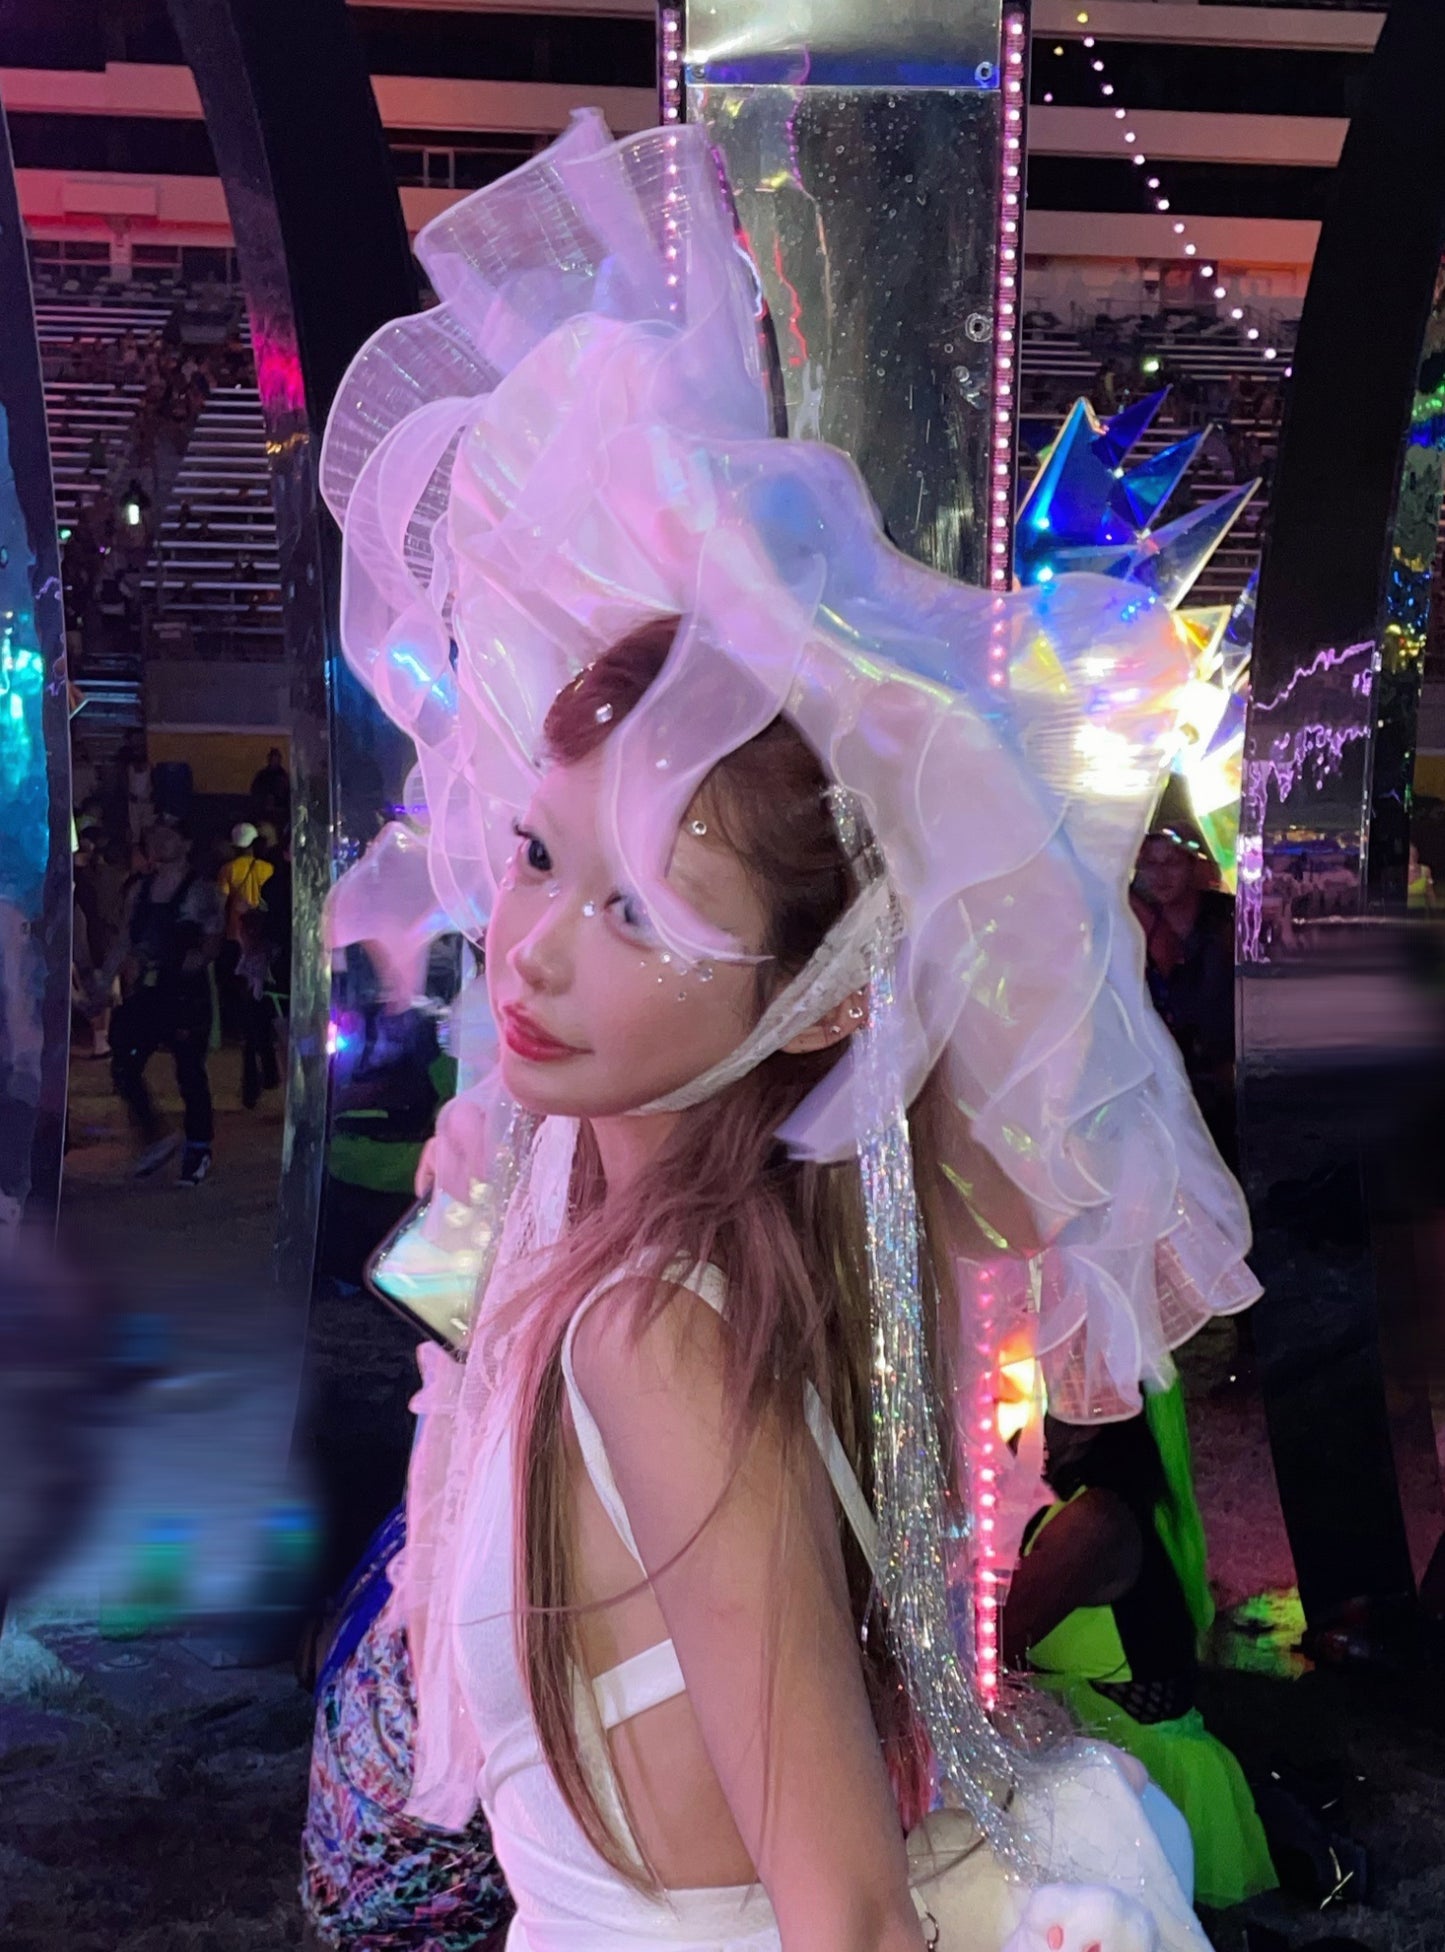 PearlWhite Dreamy Jellyfish Hat Holographic Metallic Space Rave Hat